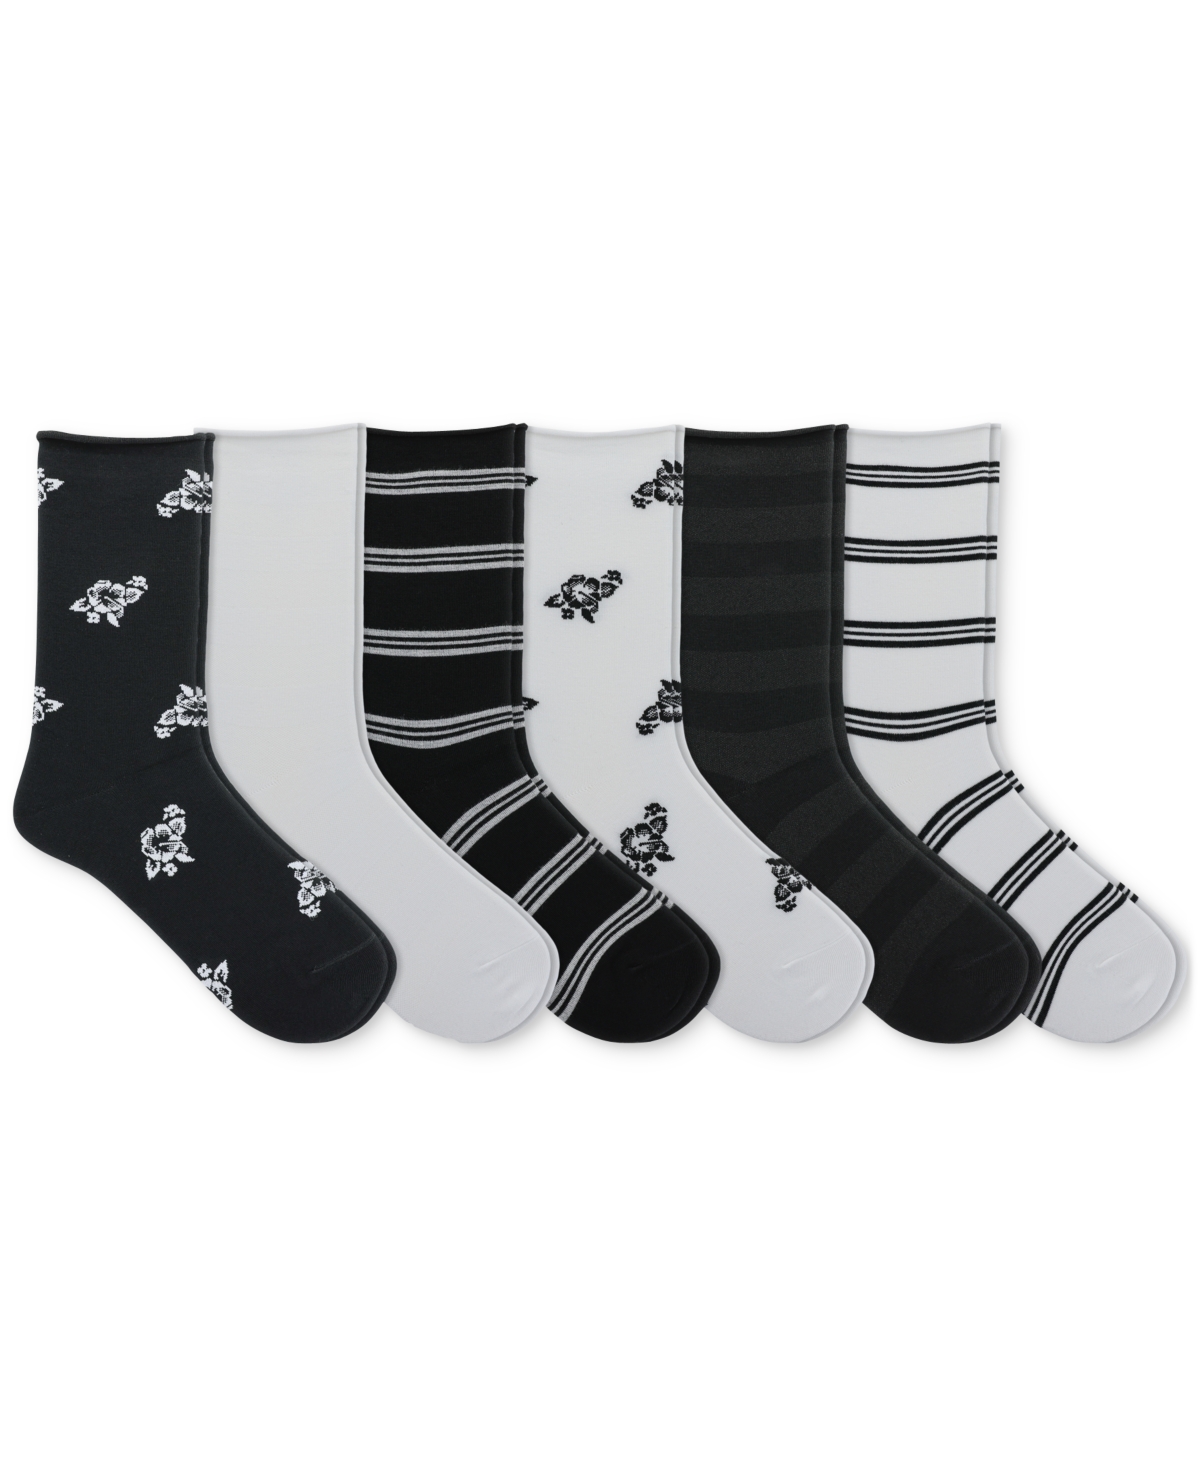 Women's 6-Pk. Tropical Floral Roll-Top Socks - Black Assorted